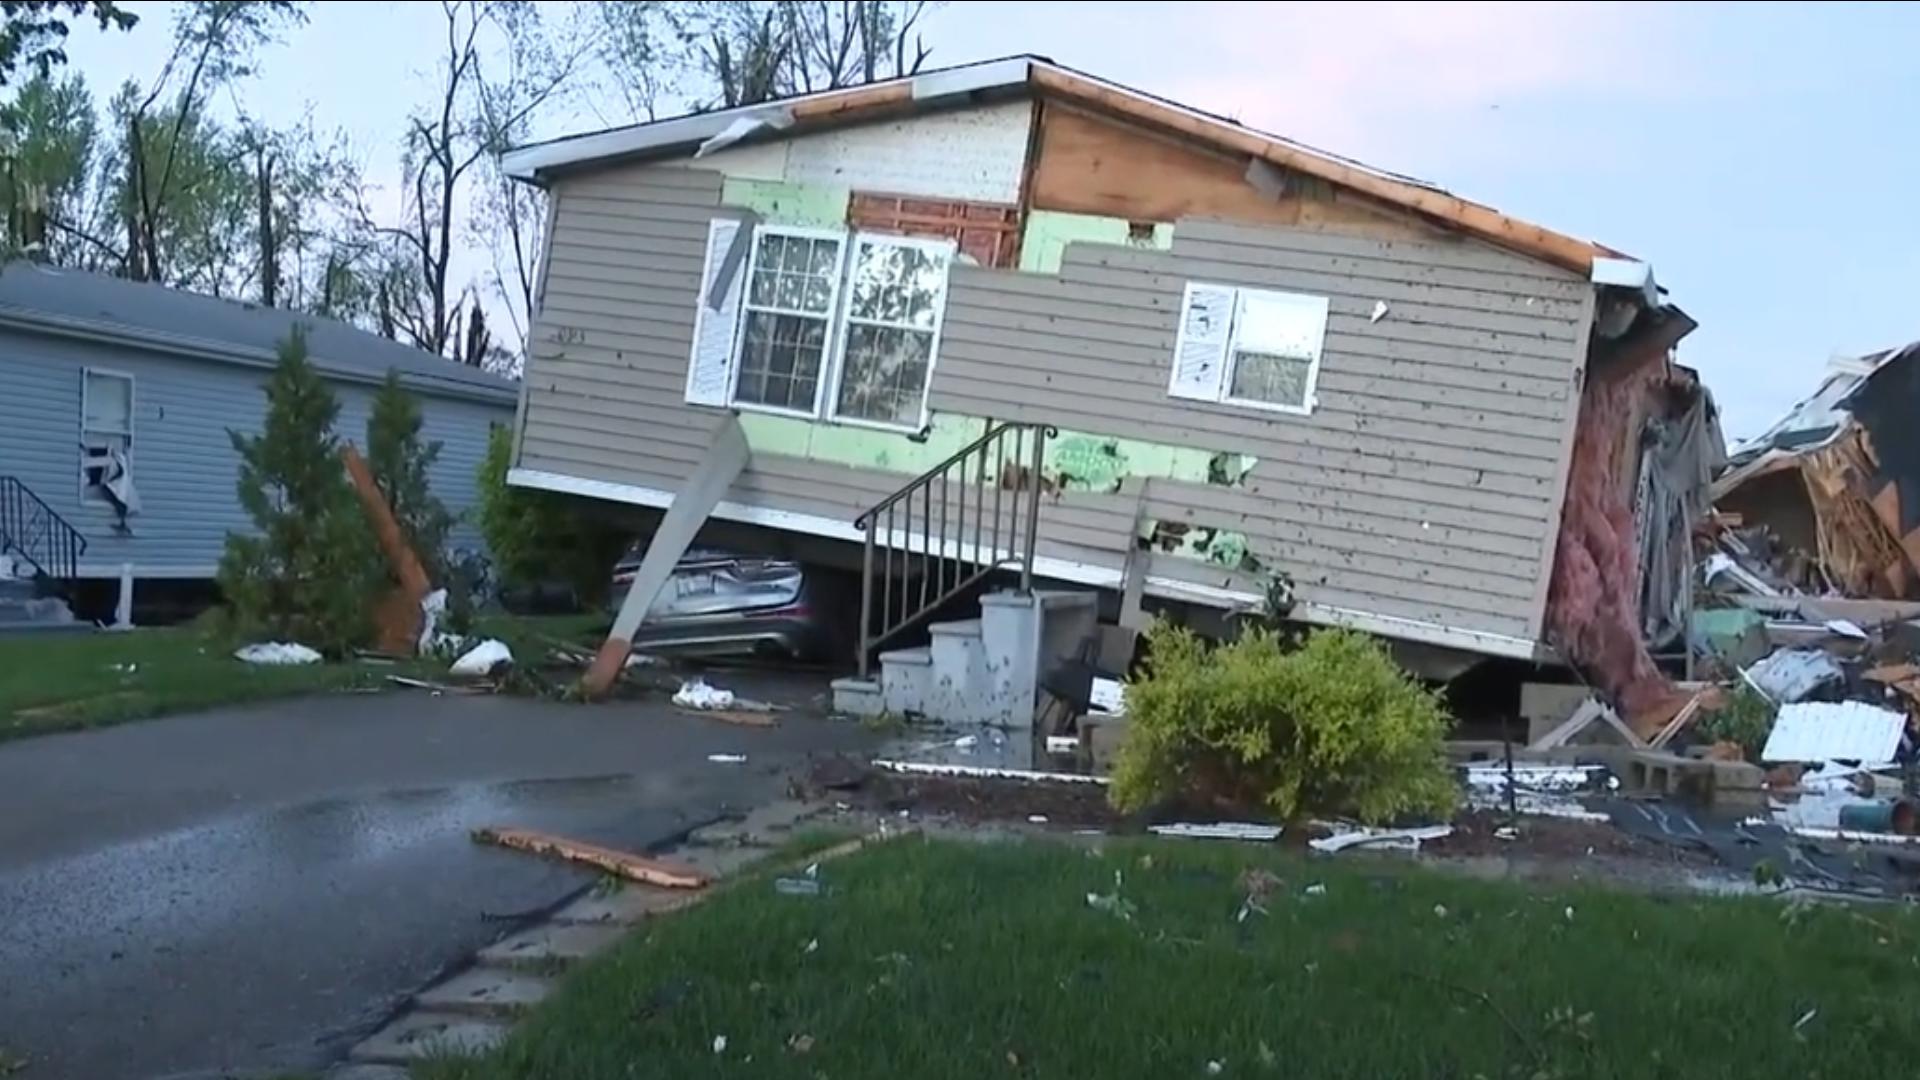 Communities in Southwest Michigan are picking up the pieces after four tornadoes tore through the region Tuesday evening.